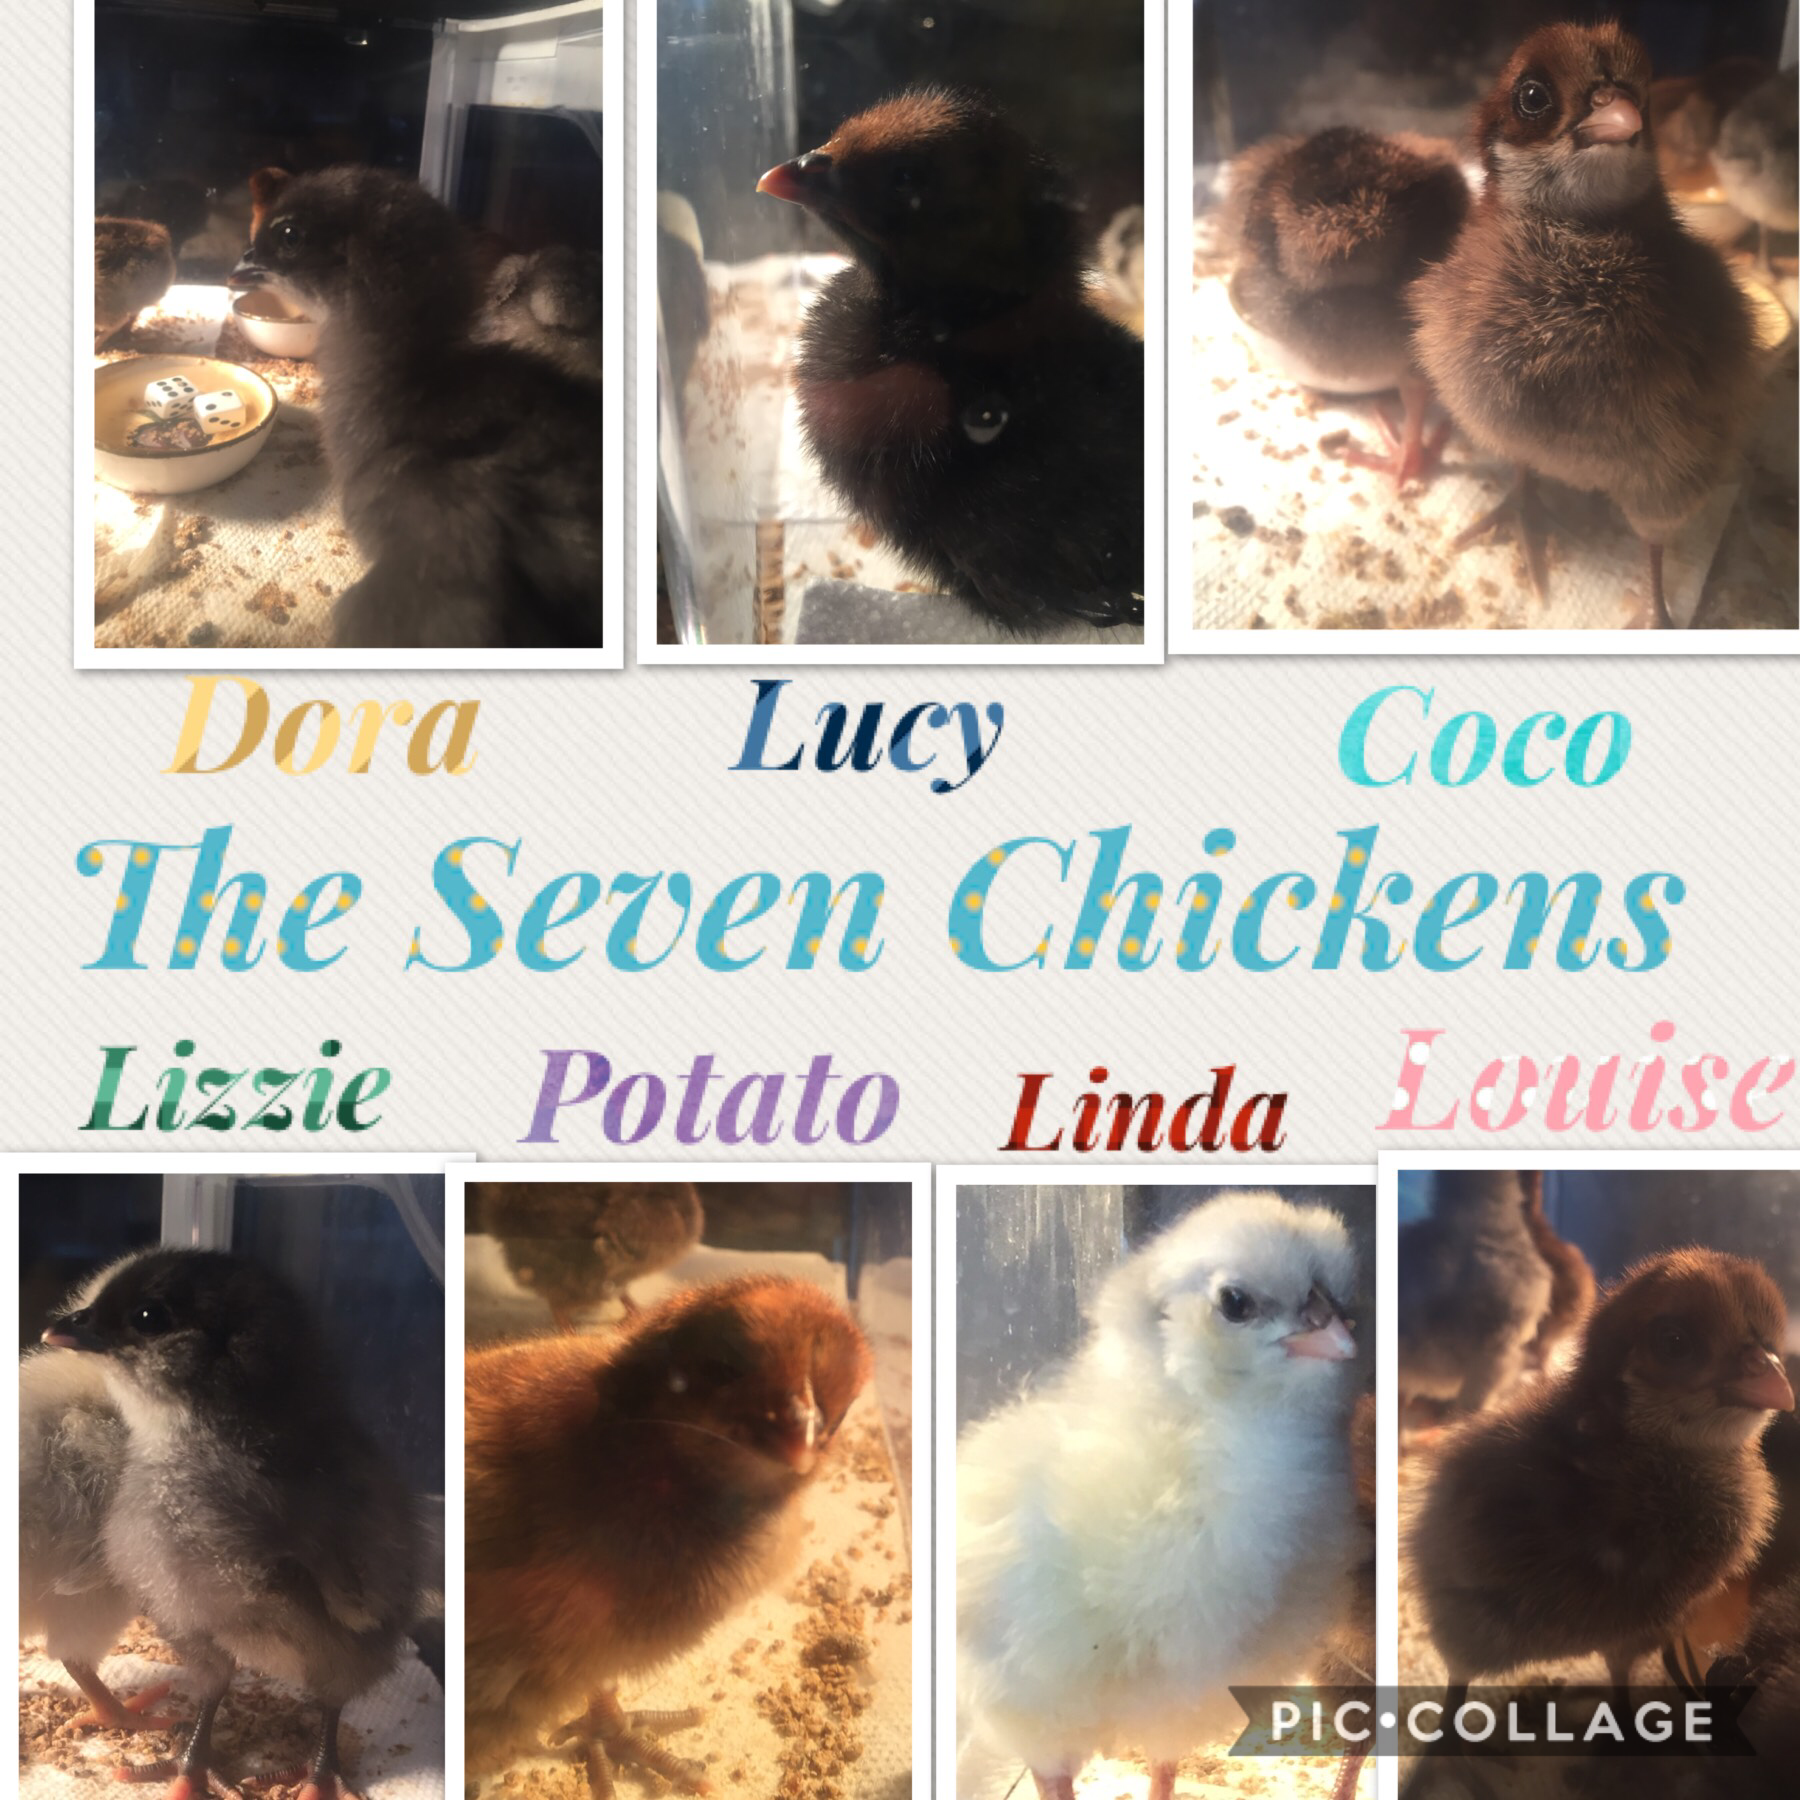 I wasn’t lying about my chickens